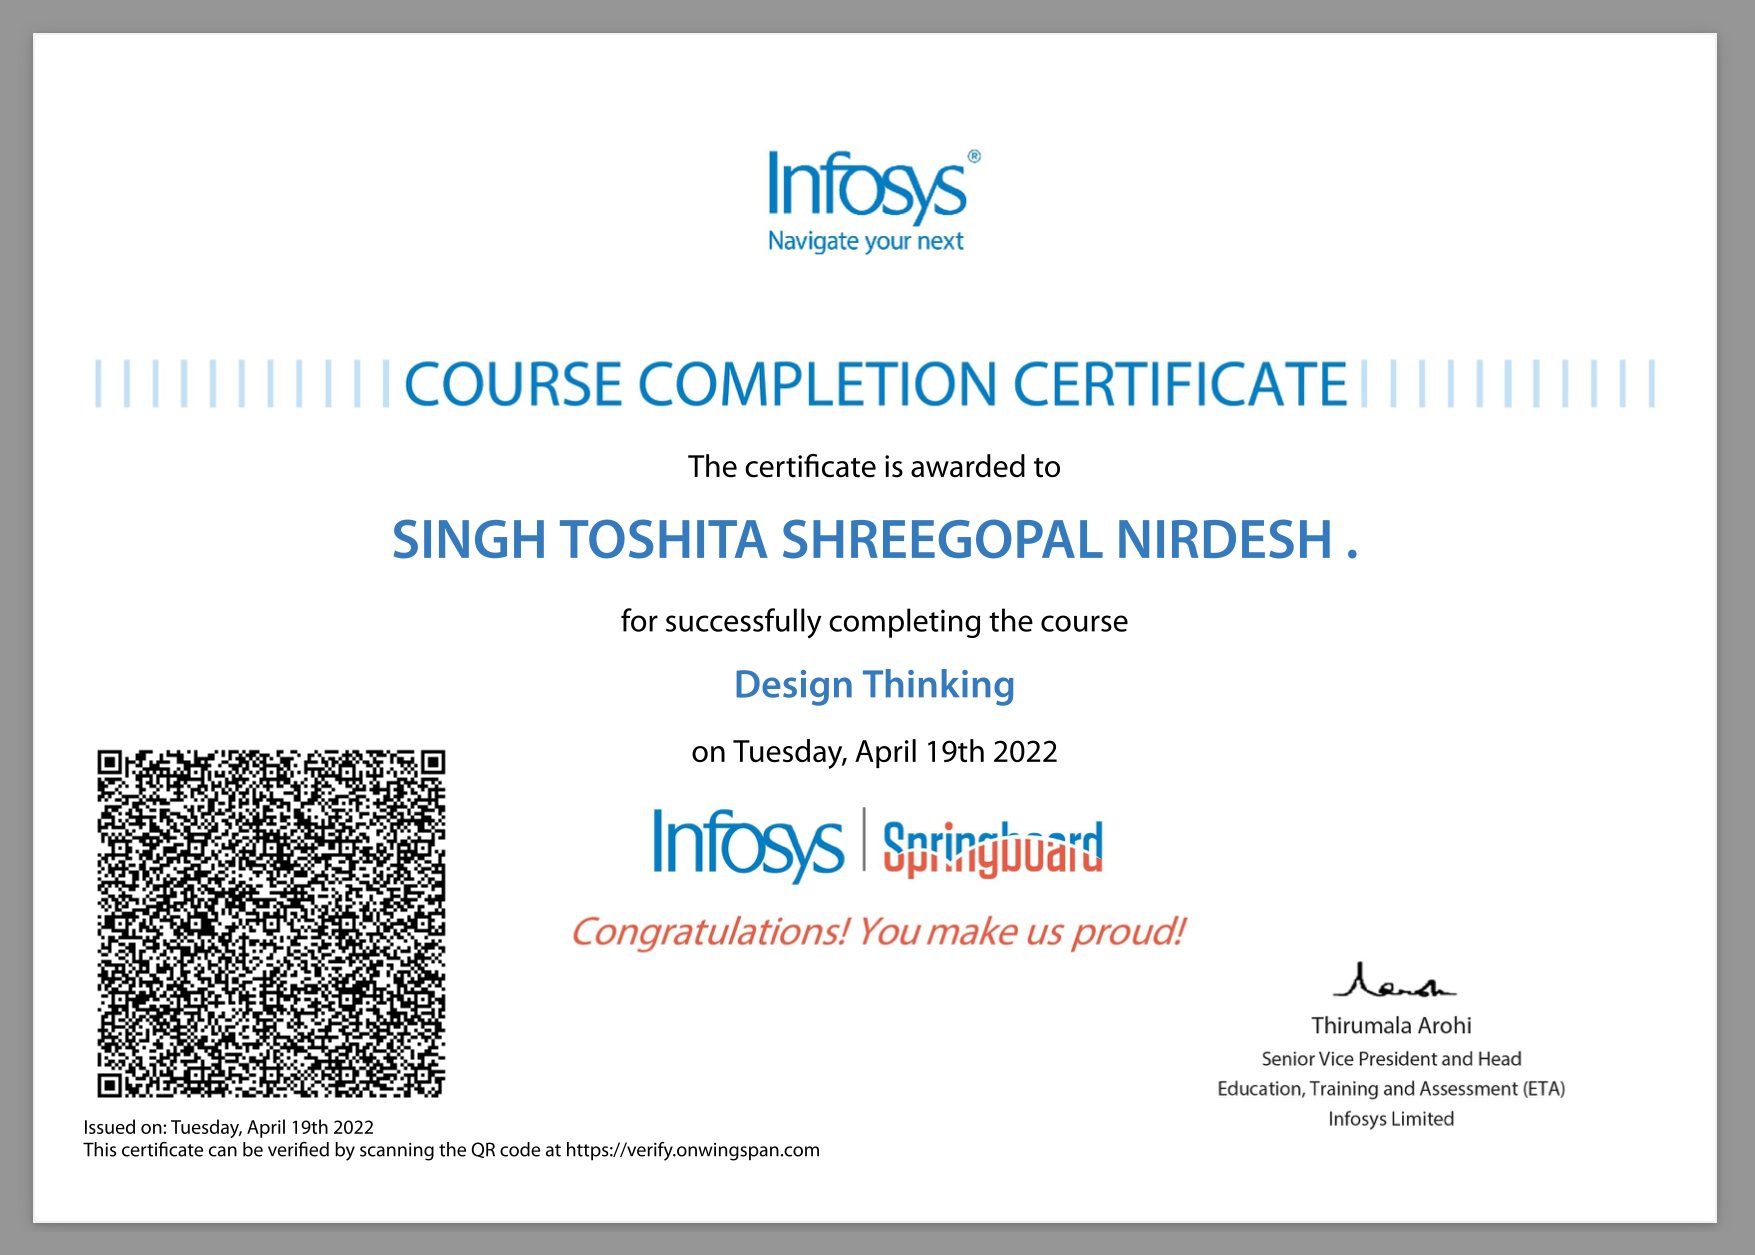 Toshita Singh 💜 on Twitter: "Got my certificate on "Design Thinking" by Infosys Springboard. @Infosys #InfosysSpringboard https://t.co/byy3B2YlcP" / Twitter